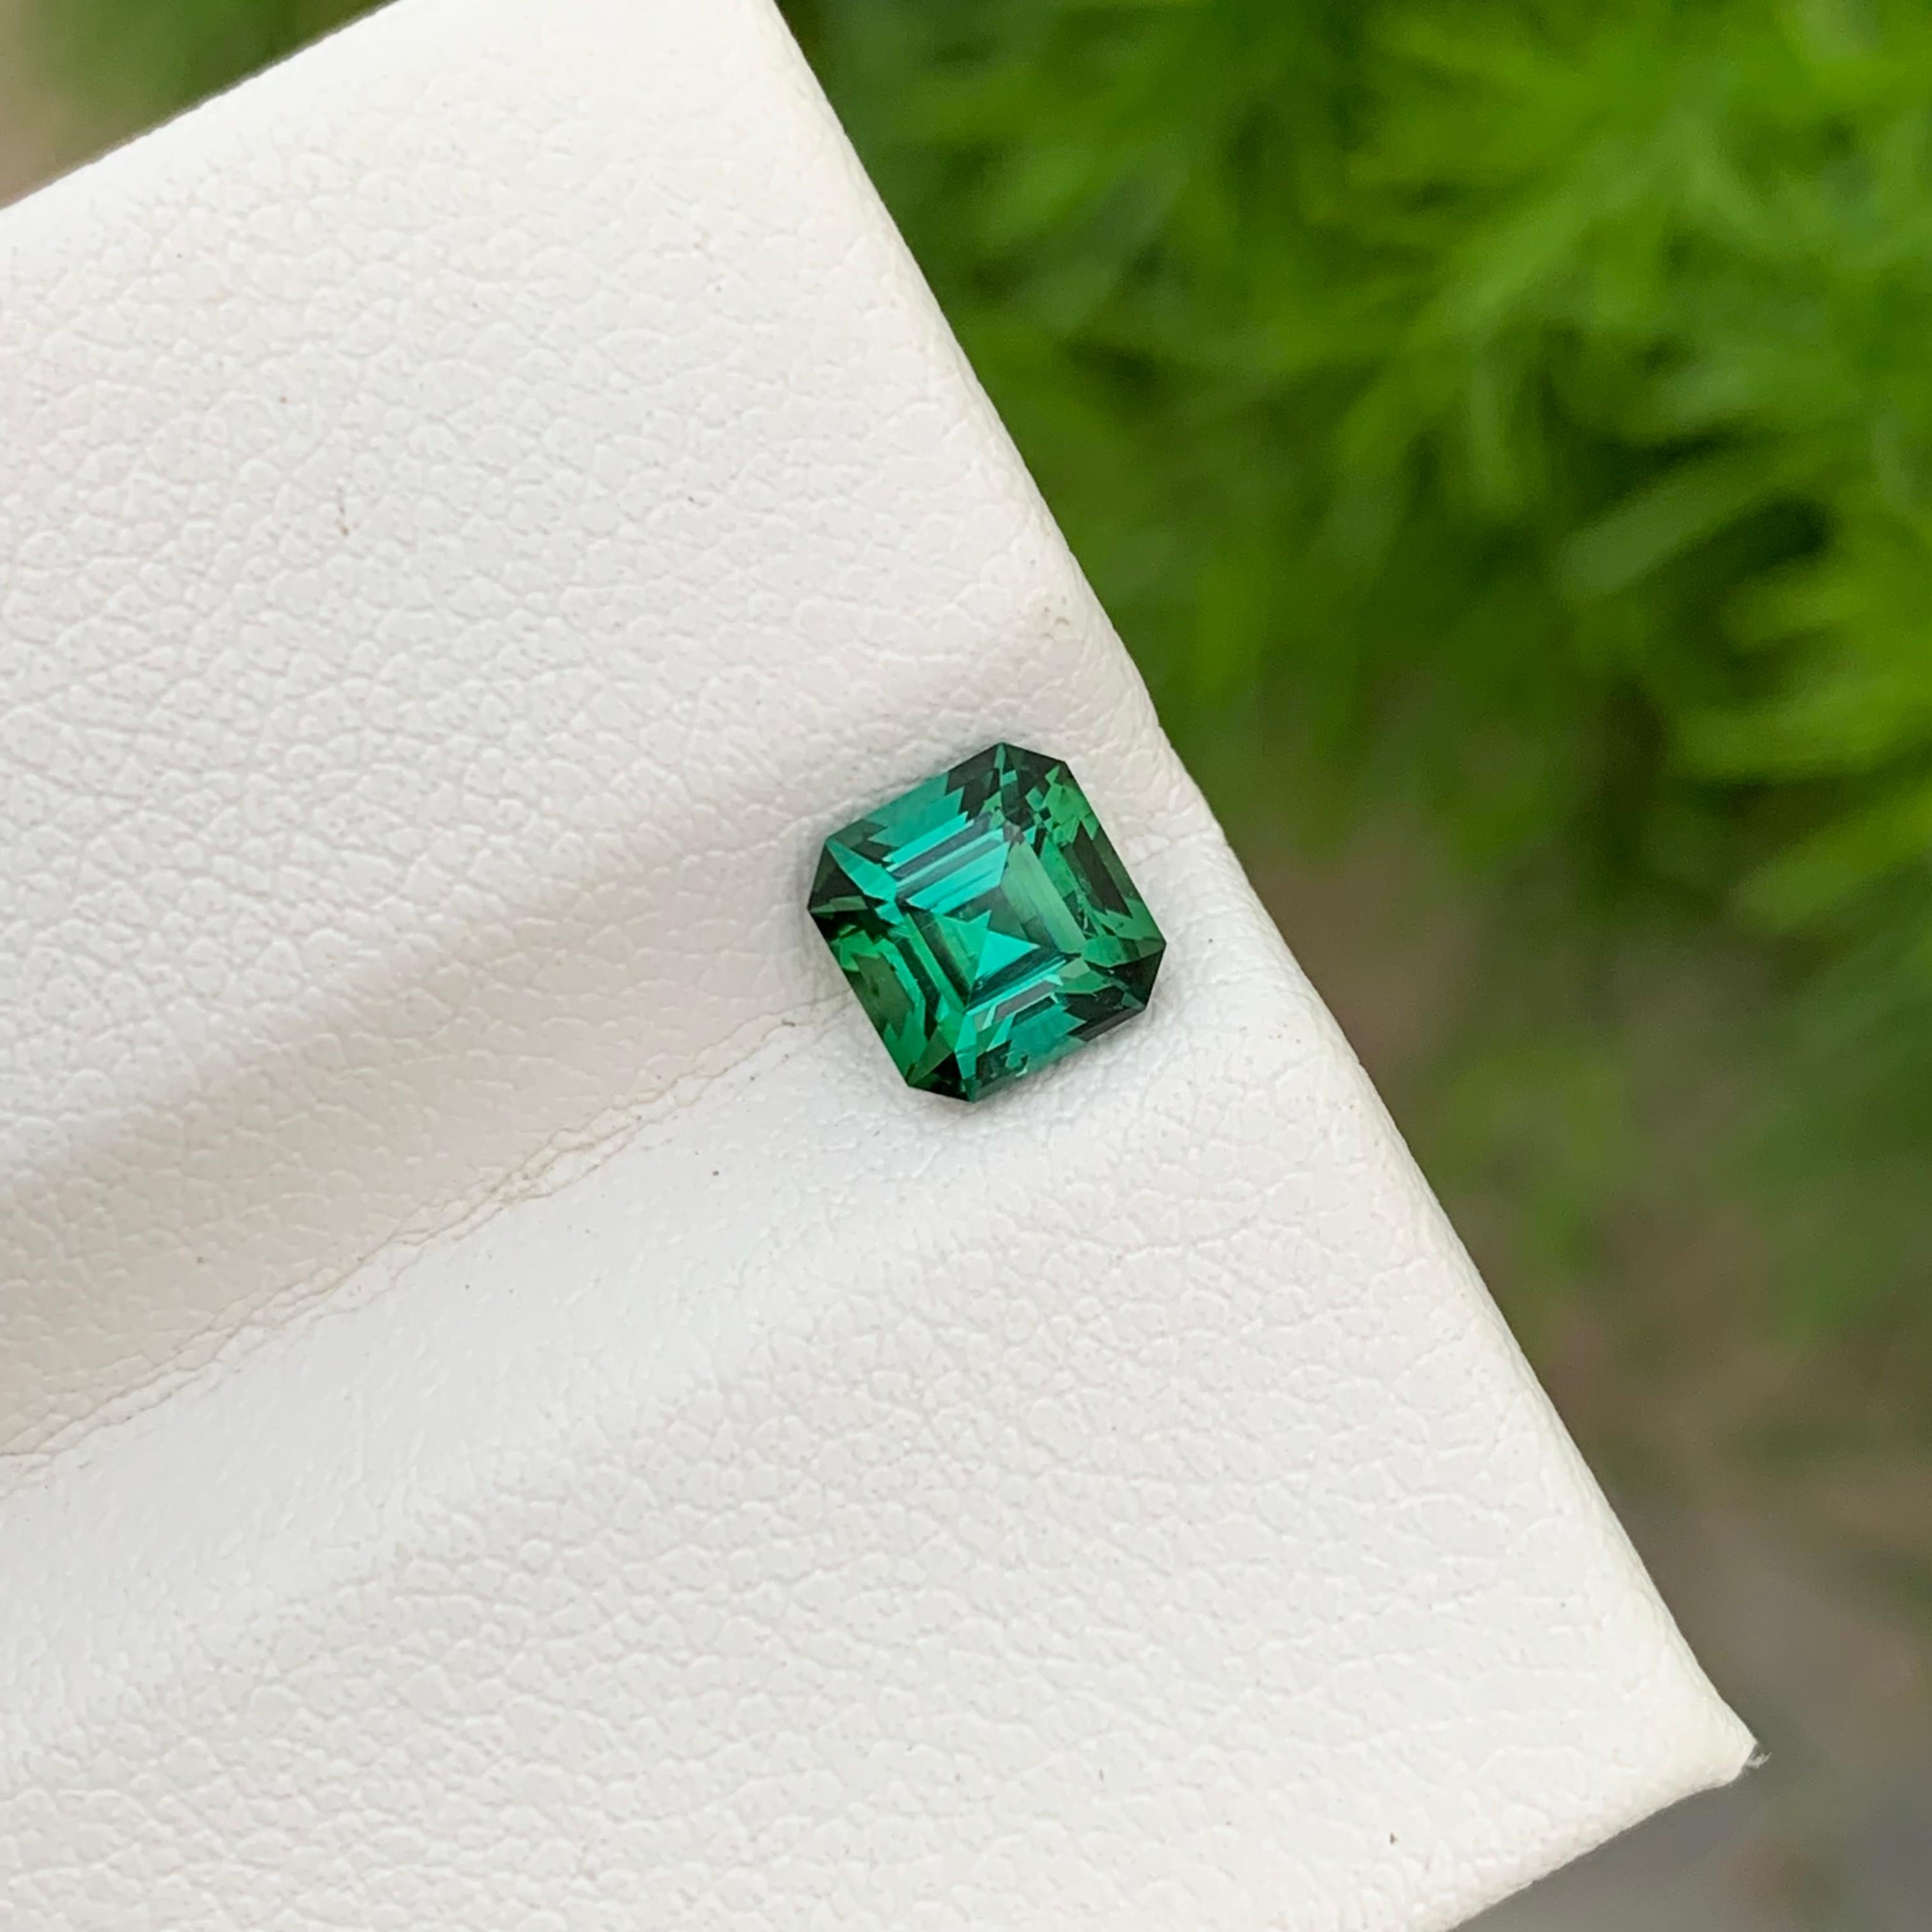 Loose Tourmaline 
Weight: 1.10 Carats 
Dimension: 5.9x5.7x4.5 Mm
Origin: Kunar Afghanistan 
Shape: Asscher 
Color: Green With Lagoon Shade
Treatment: Non
Certificate: On Customer Demand 
Blueish green tourmaline, often referred to simply as